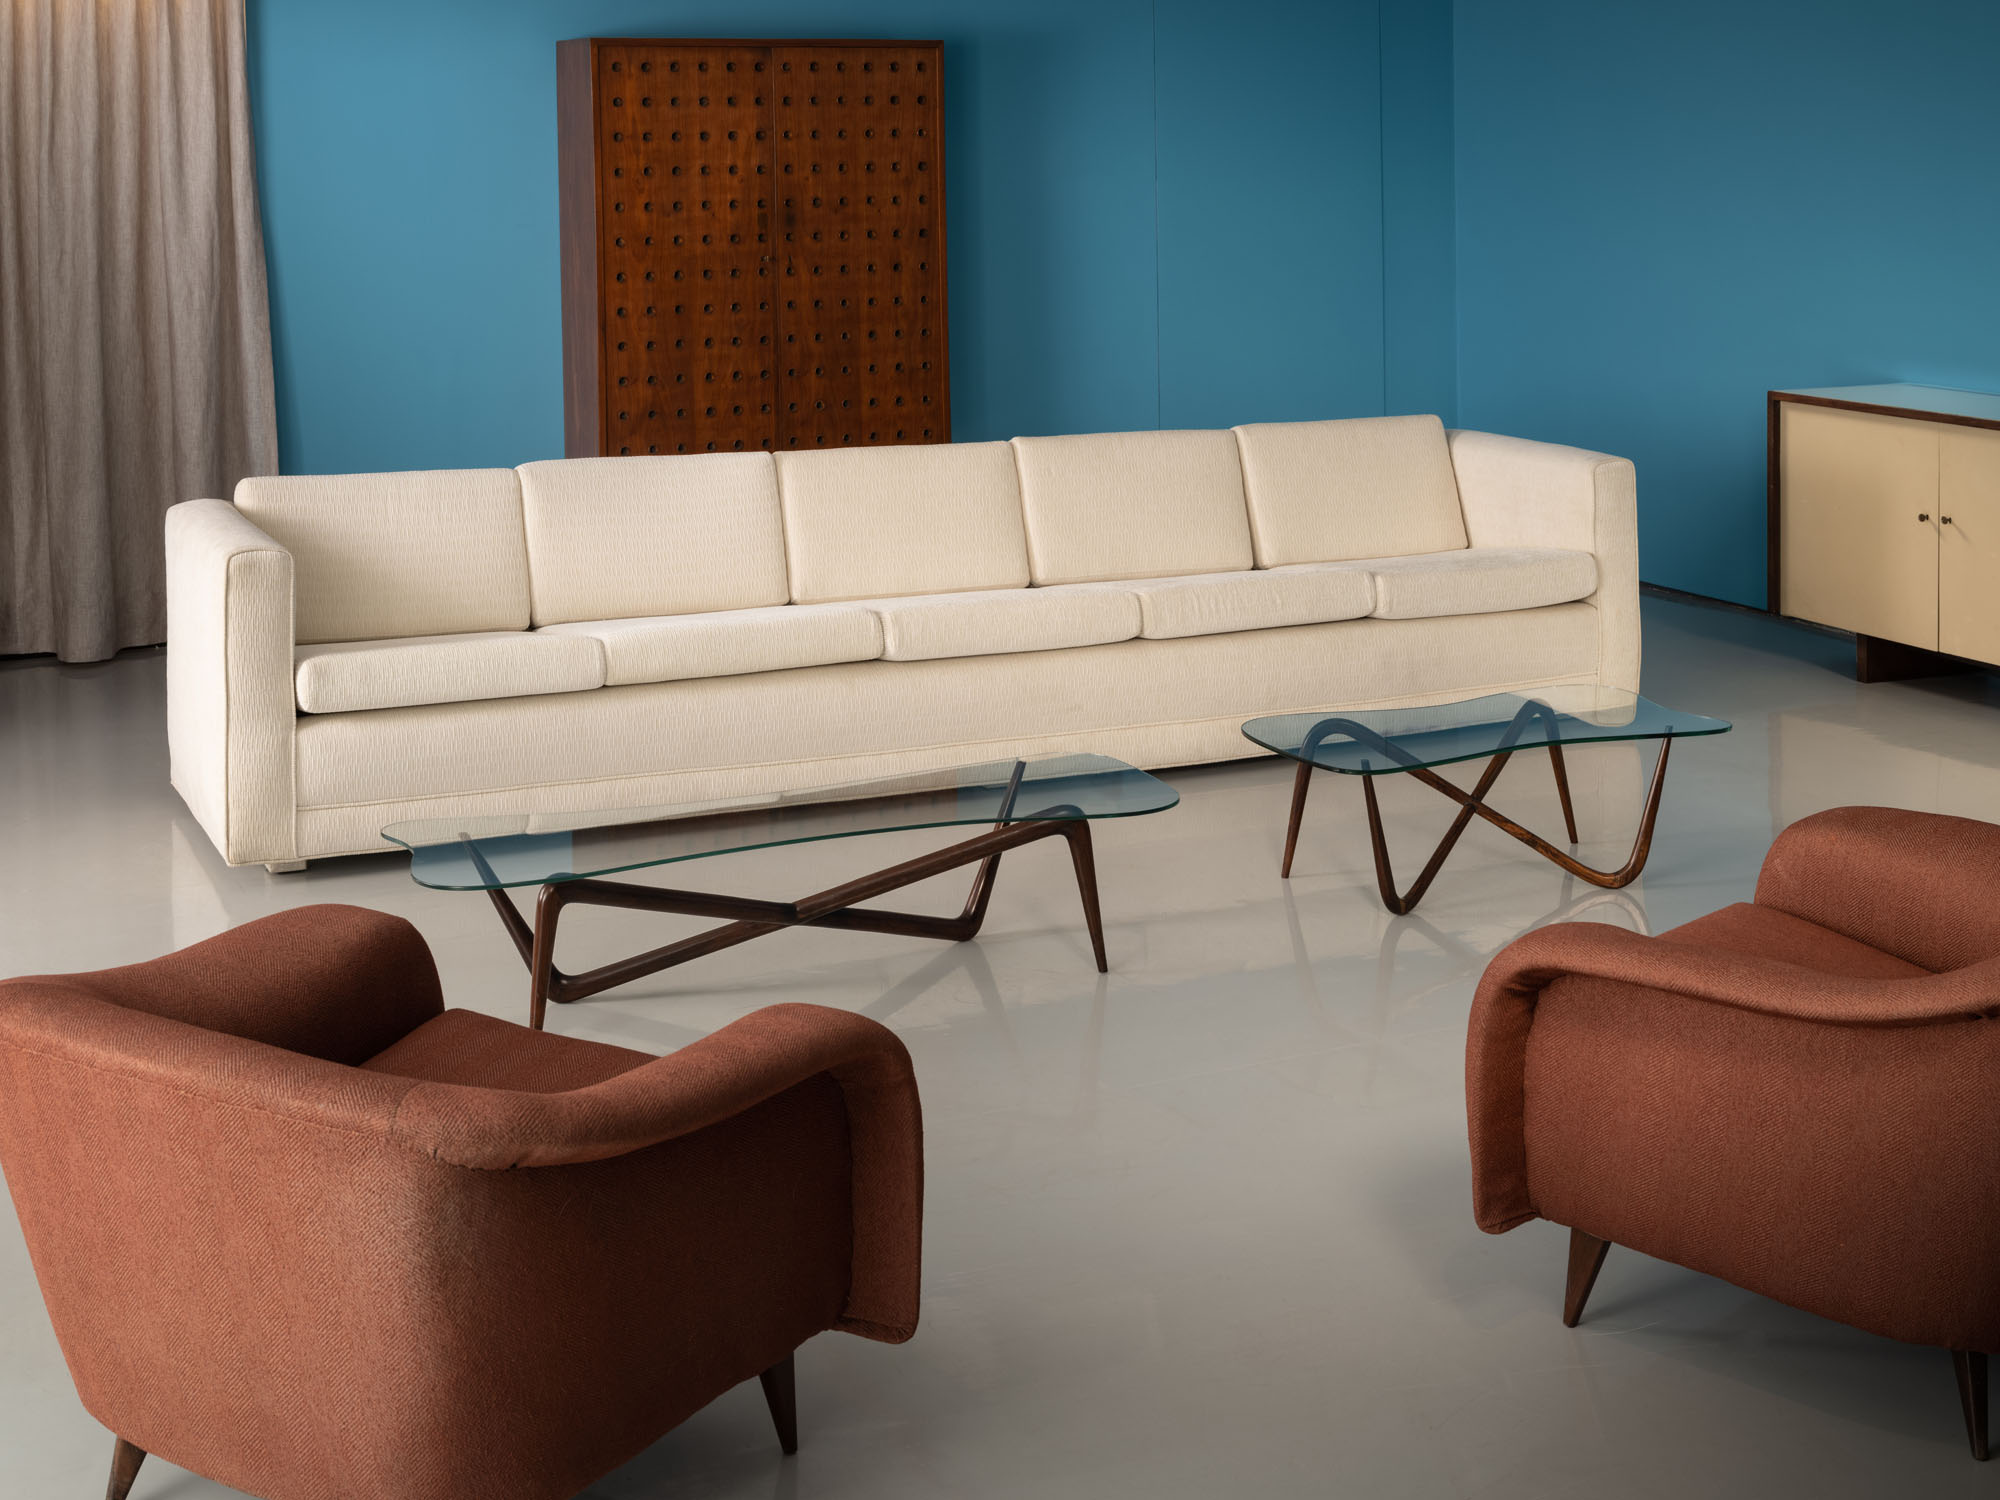 couches on display in a showroom